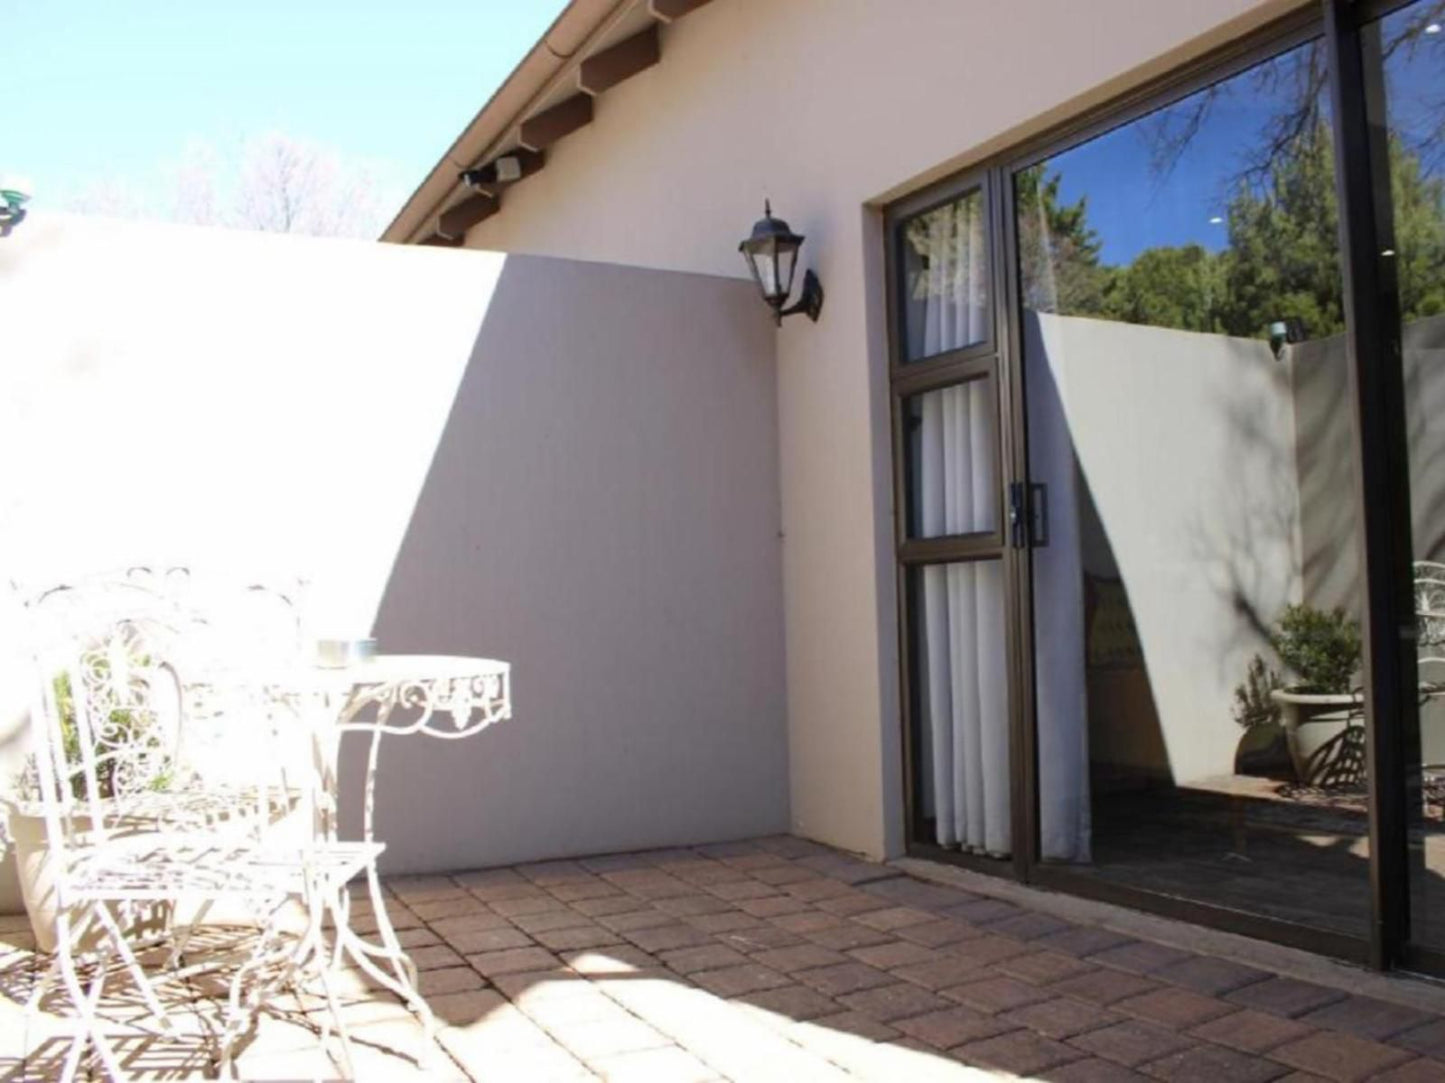 Abiento Guesthouse Park West Bloemfontein Free State South Africa House, Building, Architecture